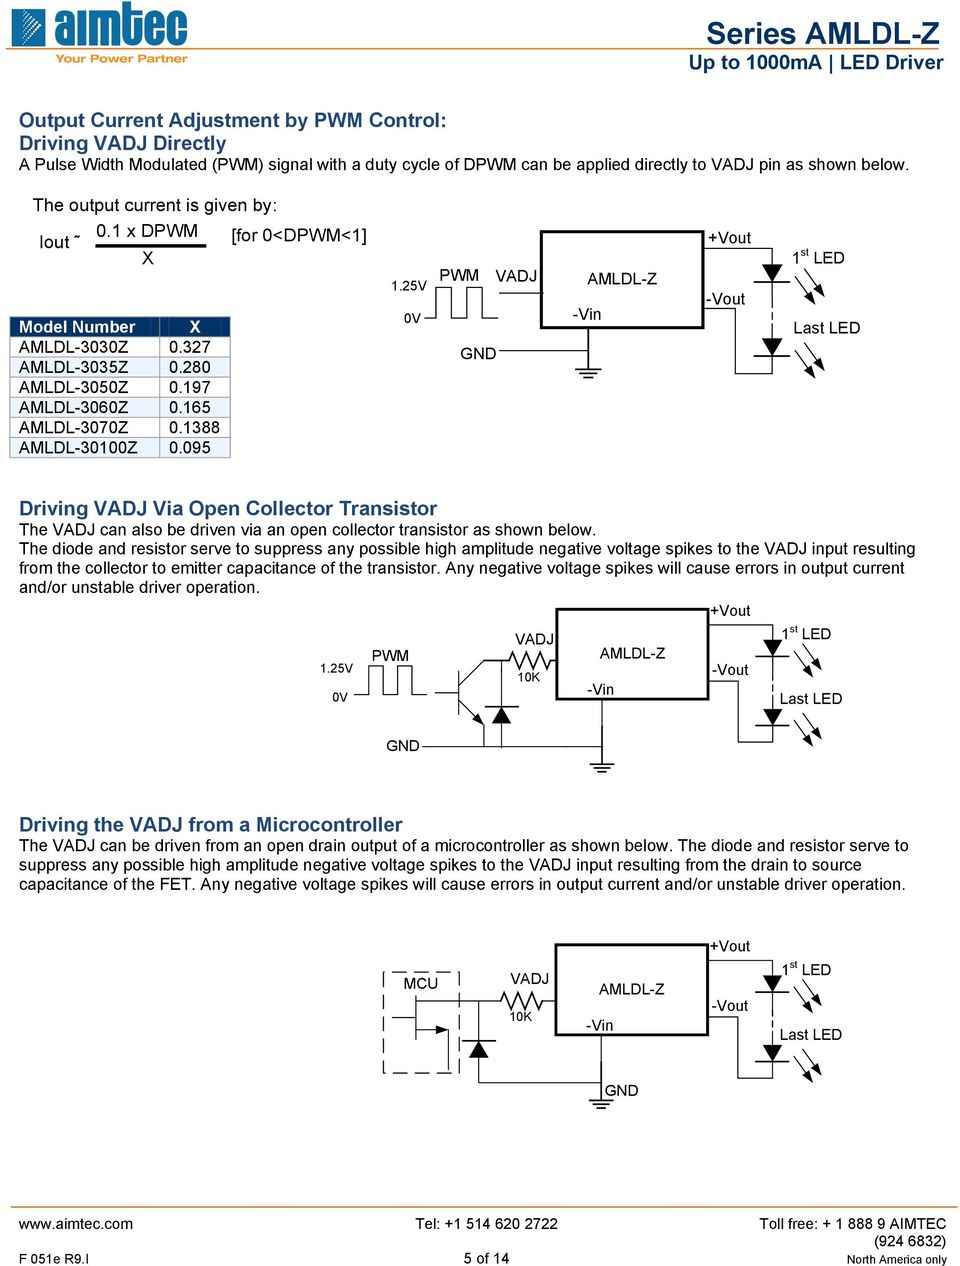 V V PWM st LED Driving Via Open Collector Transistor The can also be driven via an open collector transistor as shown below.